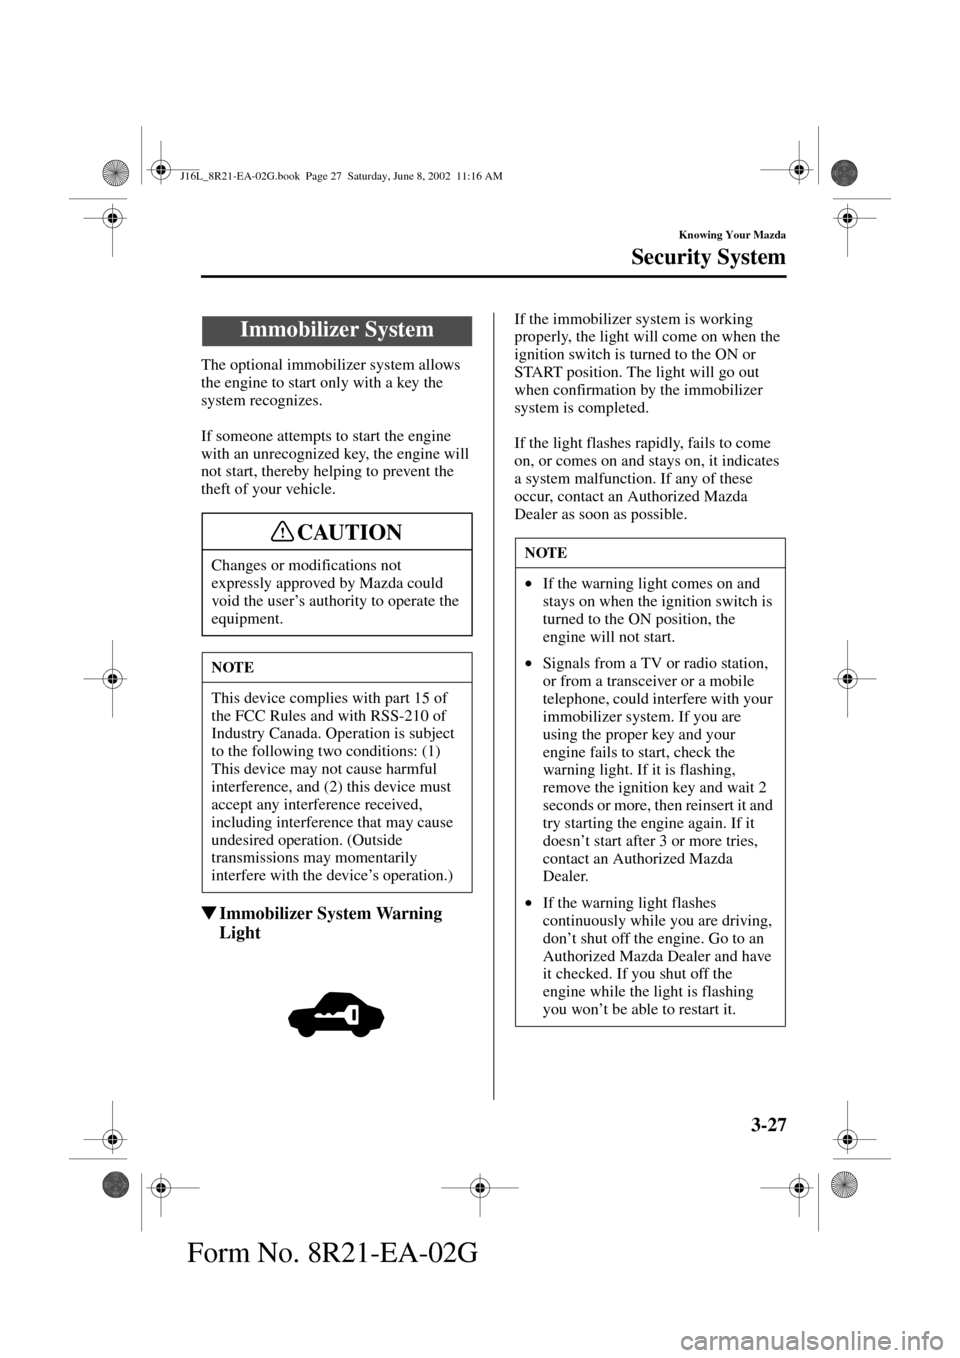 MAZDA MODEL MPV 2003  Owners Manual (in English) 3-27
Knowing Your Mazda
Form No. 8R21-EA-02G
Security System
The optional immobilizer system allows 
the engine to start only with a key the 
system recognizes.
If someone attempts to start the engine